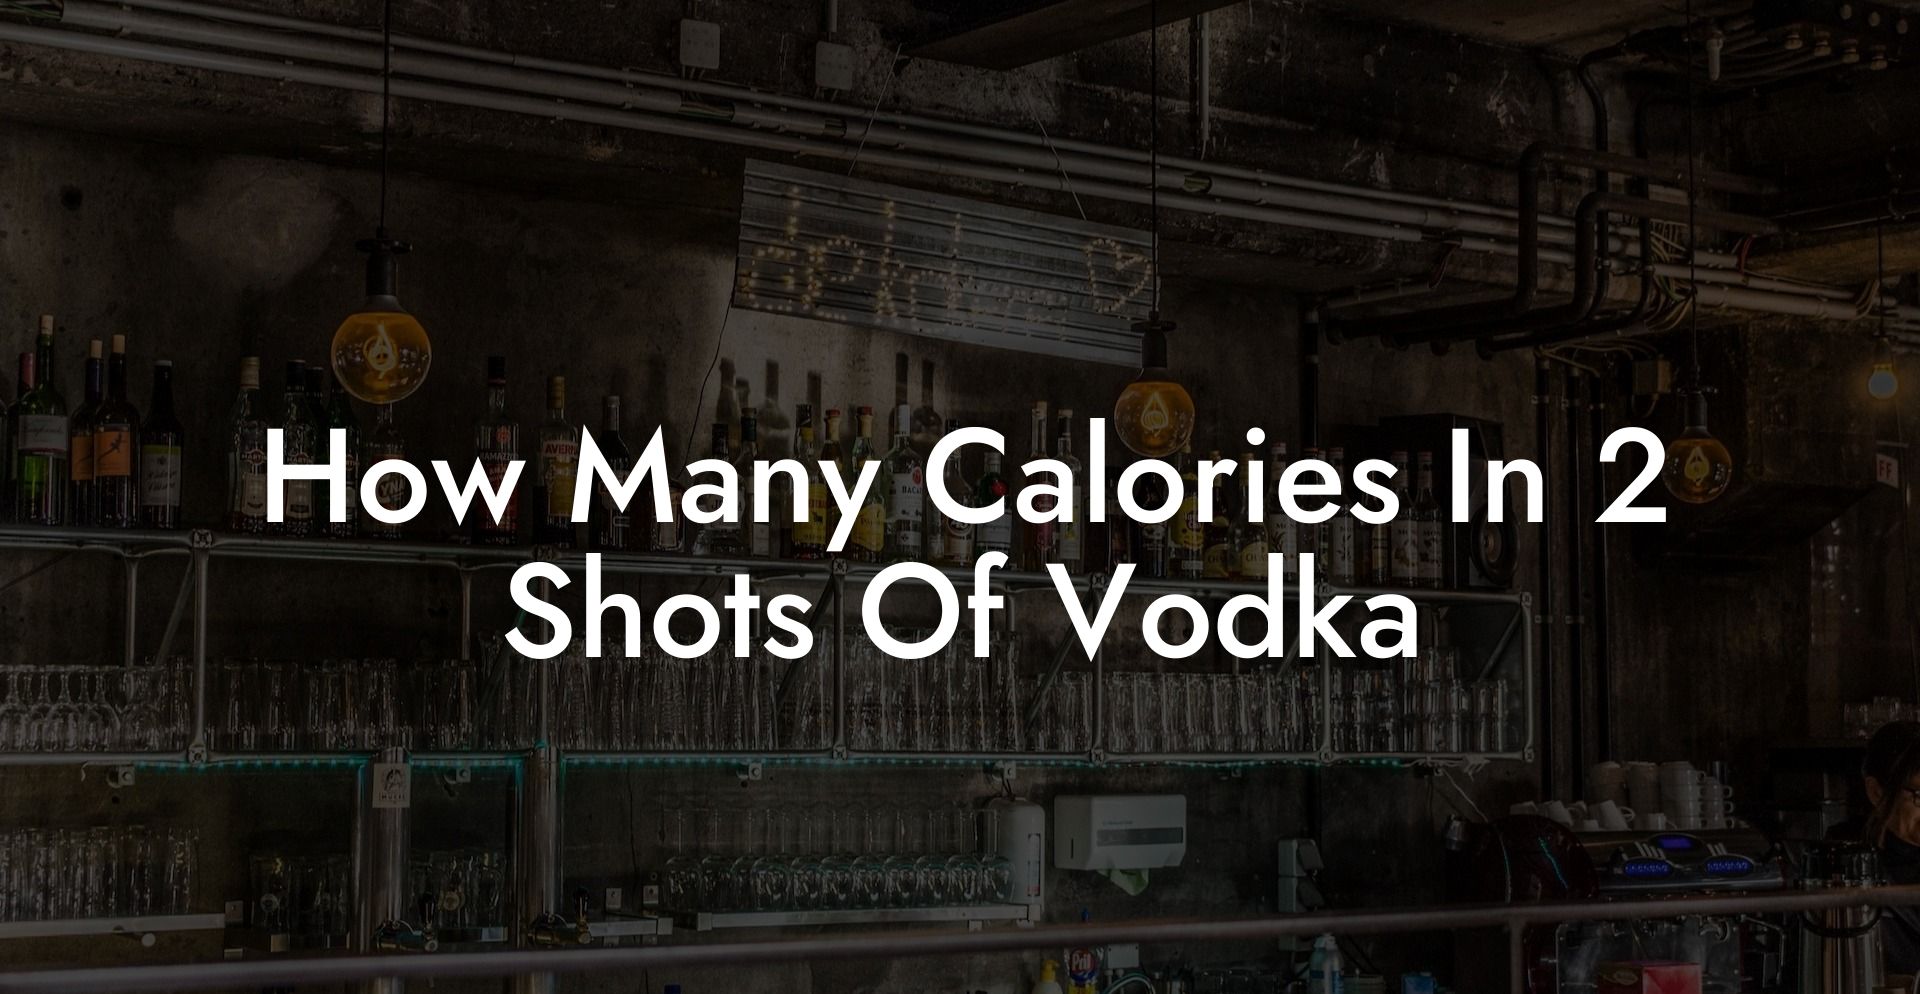 How Many Calories In 2 Shots Of Vodka